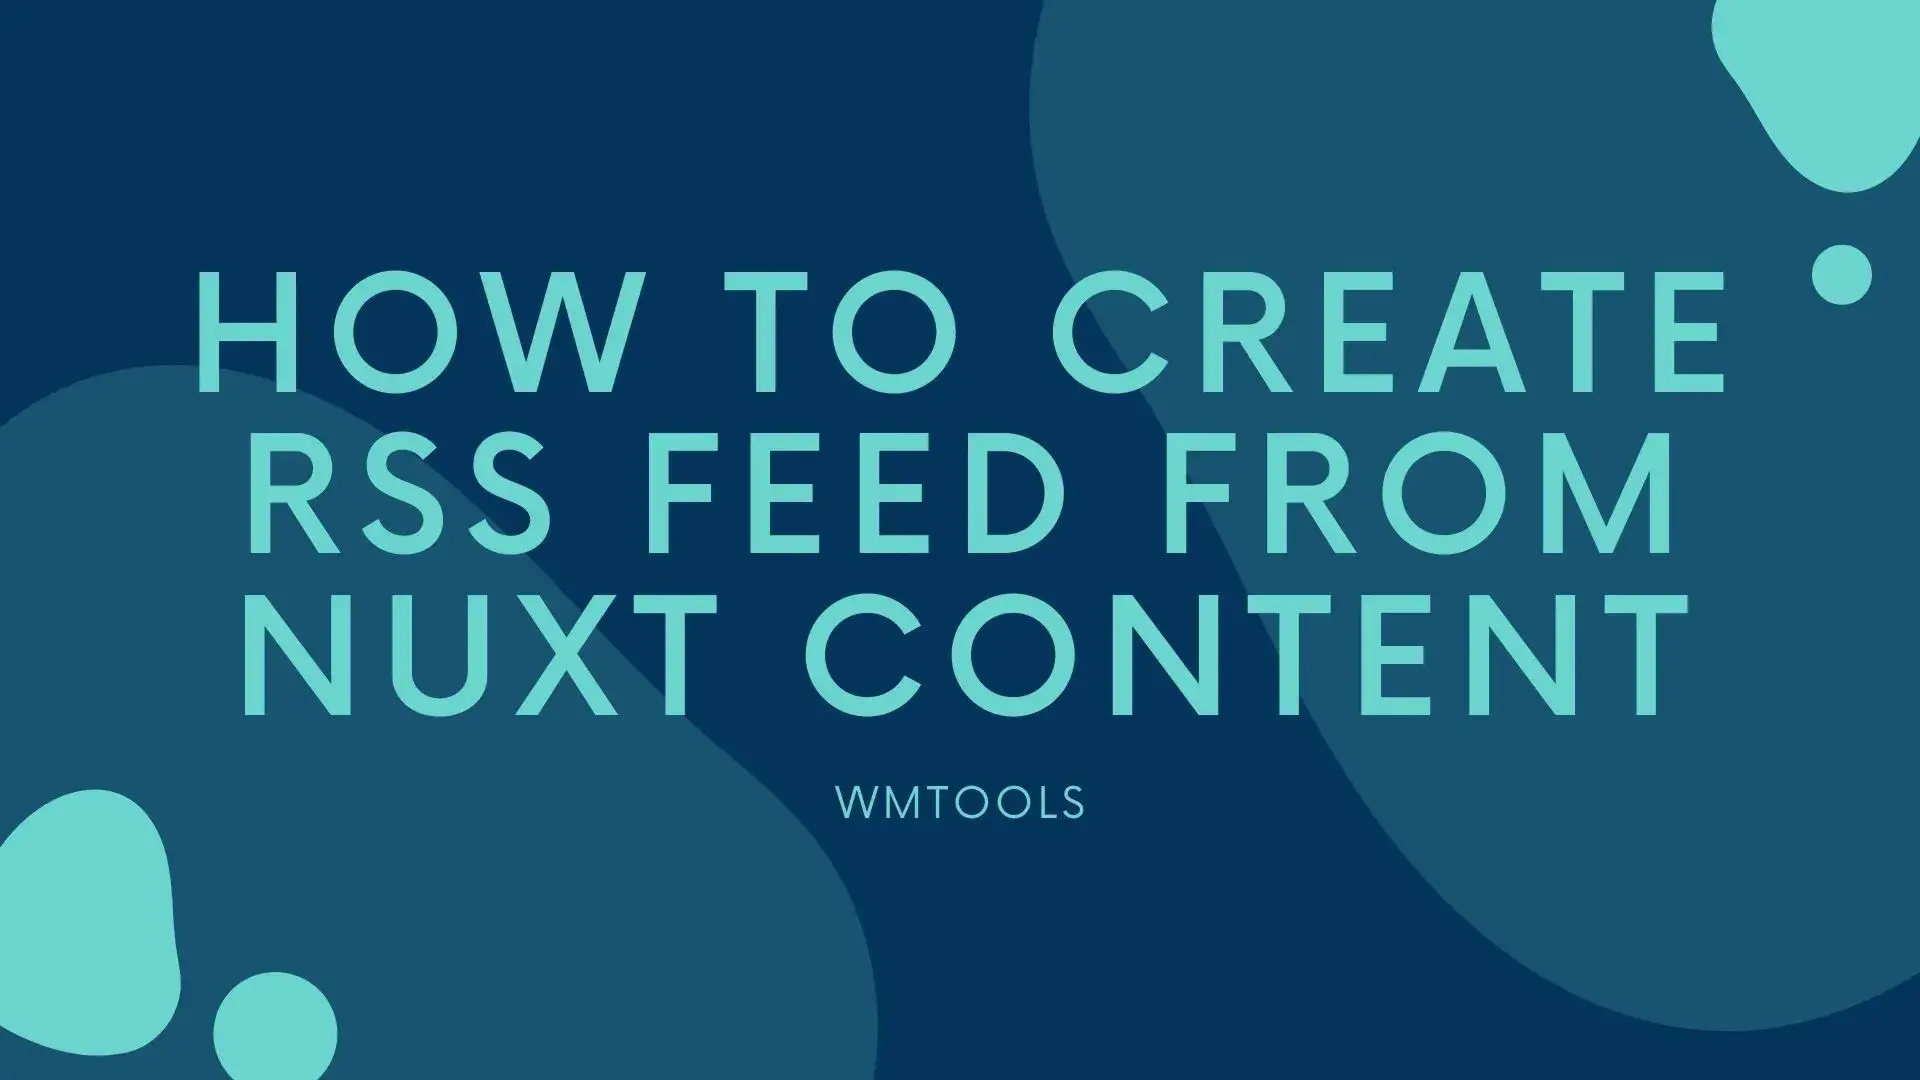 How to Create RSS Feed from Nuxt Content